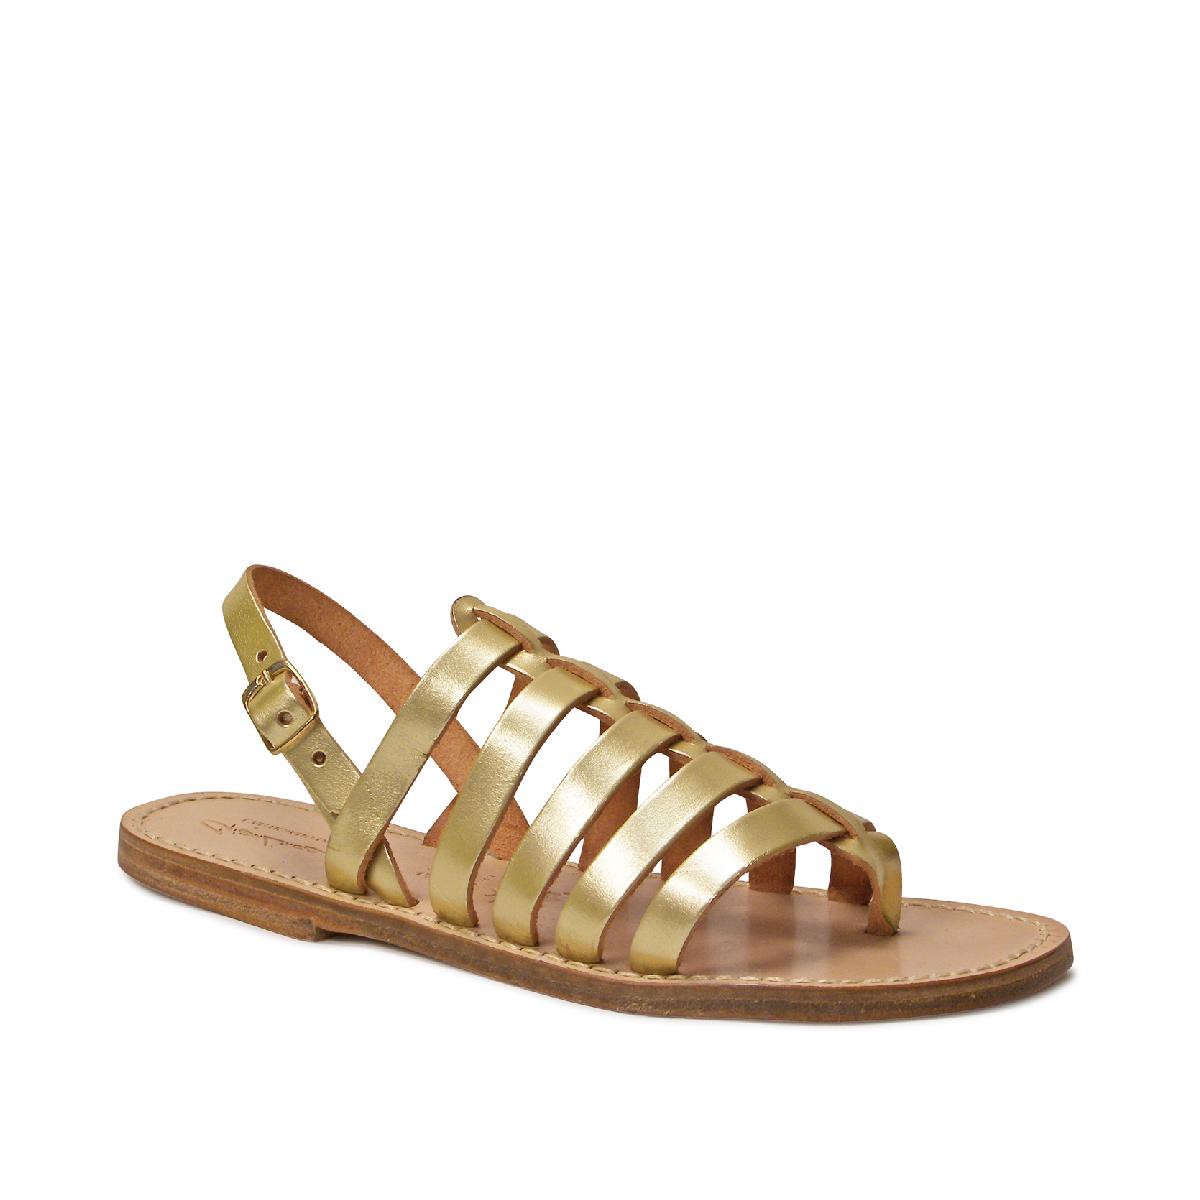 Share more than 143 gold flat gladiator sandals - awesomeenglish.edu.vn